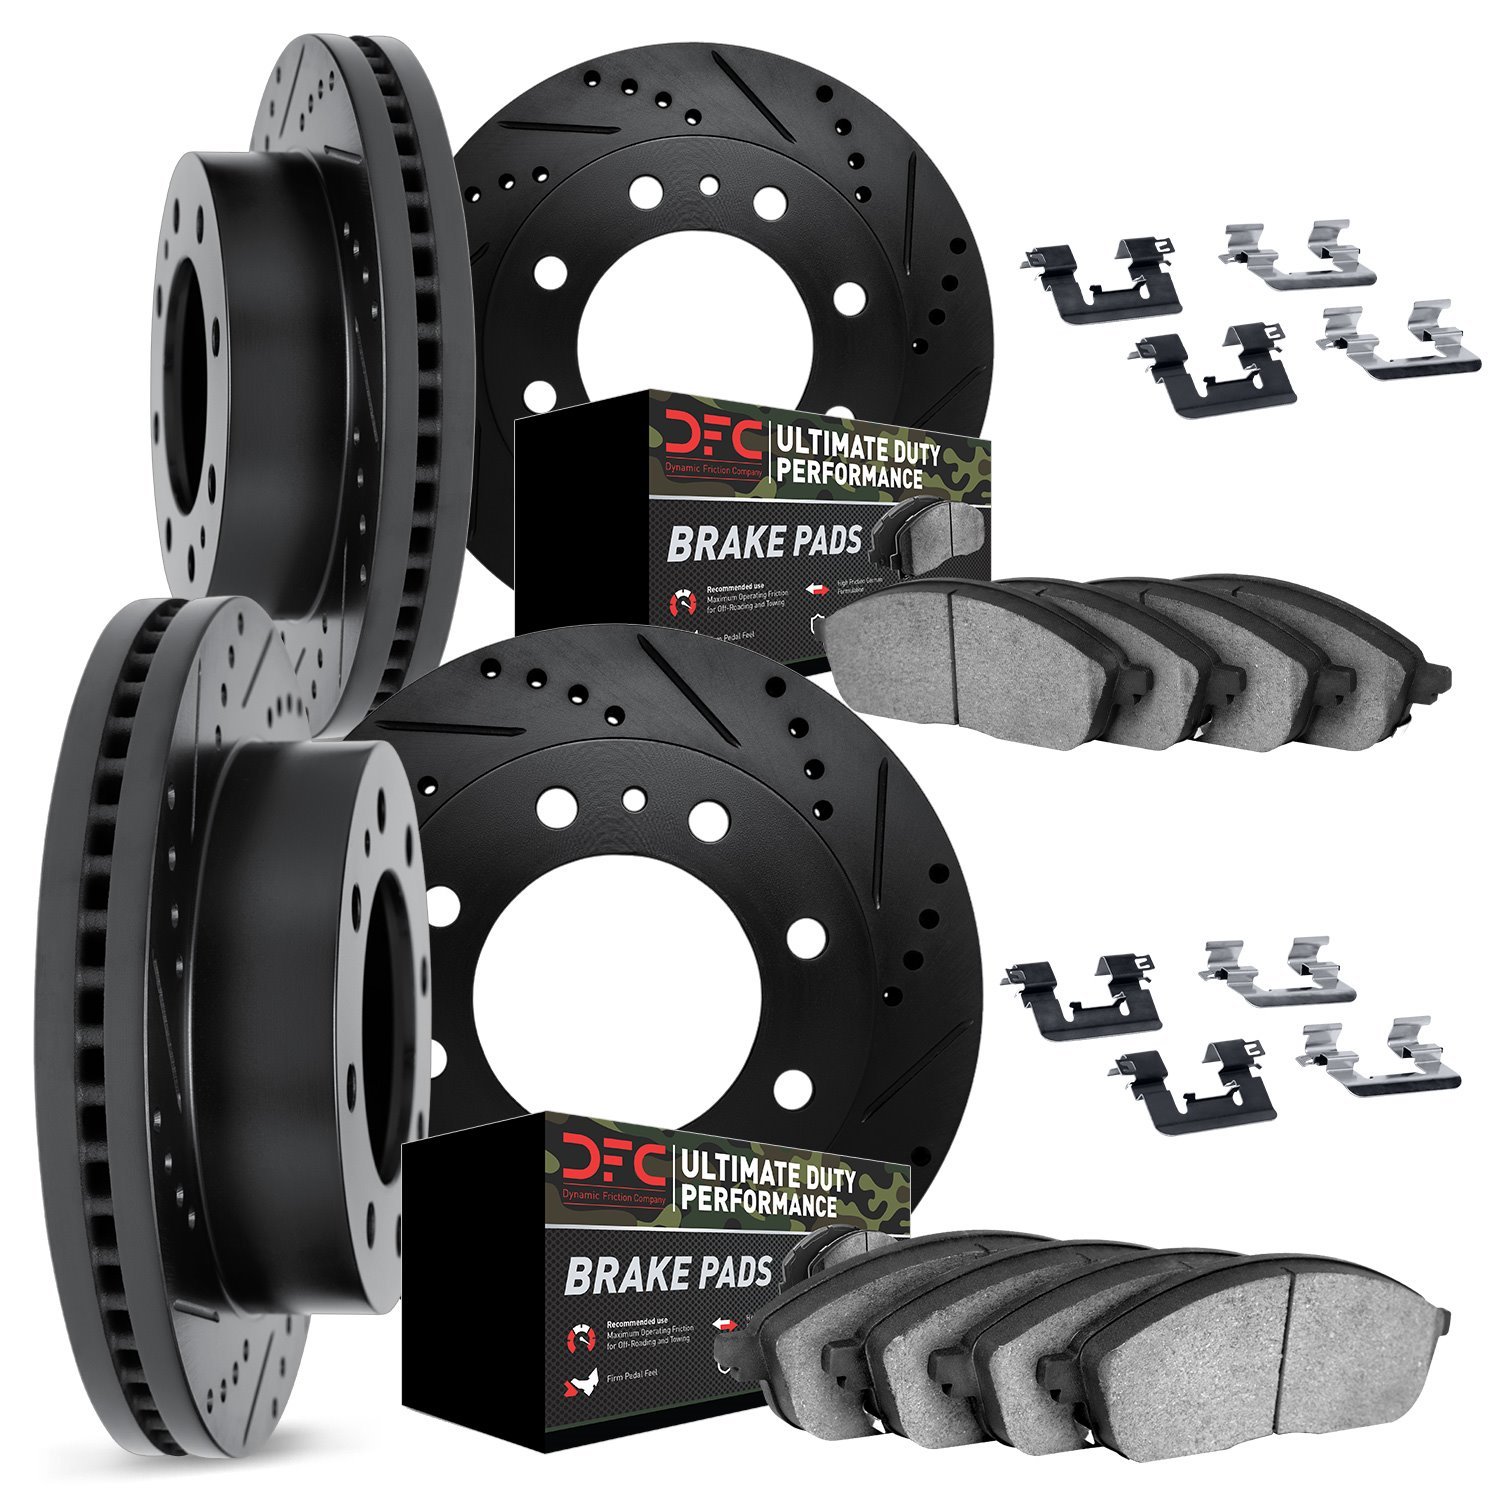 8414-54051 Drilled/Slotted Brake Rotors with Ultimate-Duty Brake Pads Kit & Hardware [Black], Fits Select Ford/Lincoln/Mercury/M